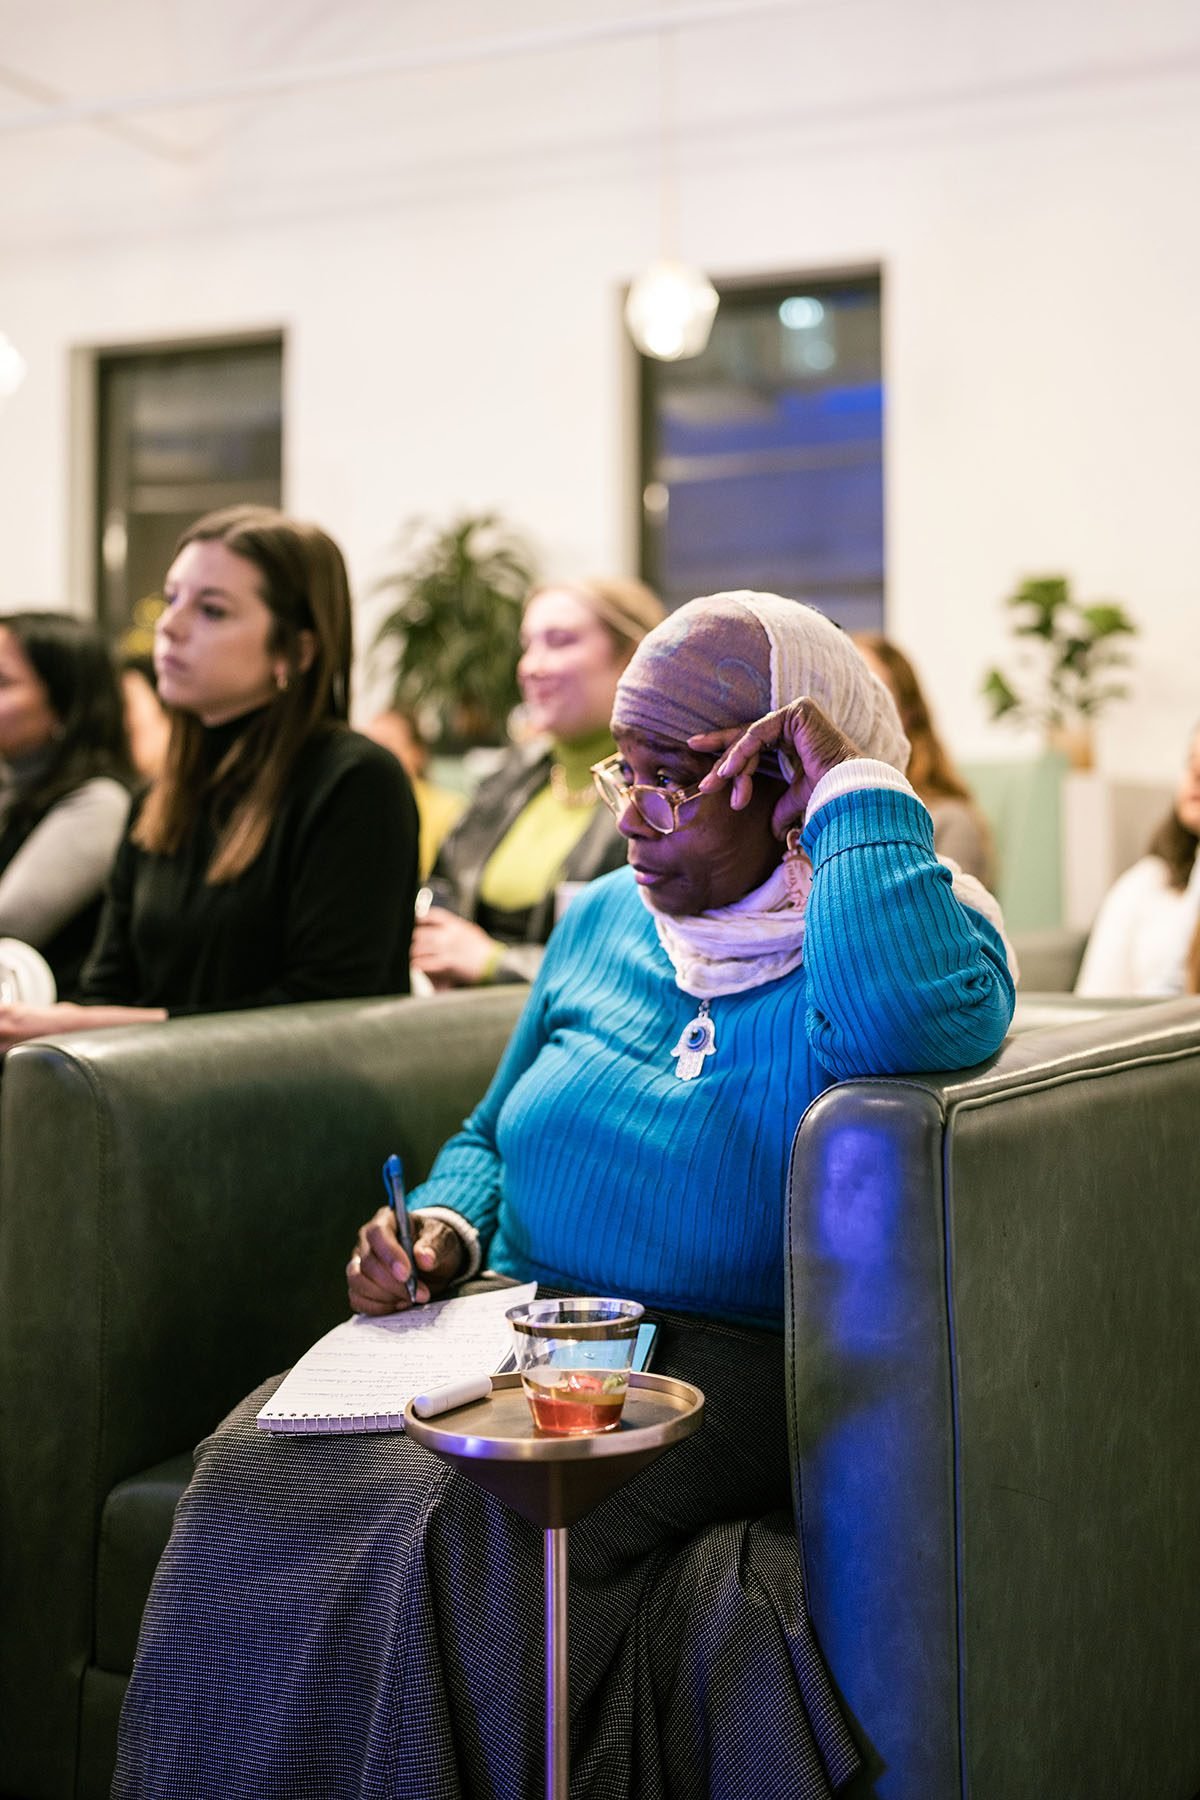 Attendees listen at "The 19th Celebrates: International Women's Day" event at The Luminary in New York City on March 7, 2023.